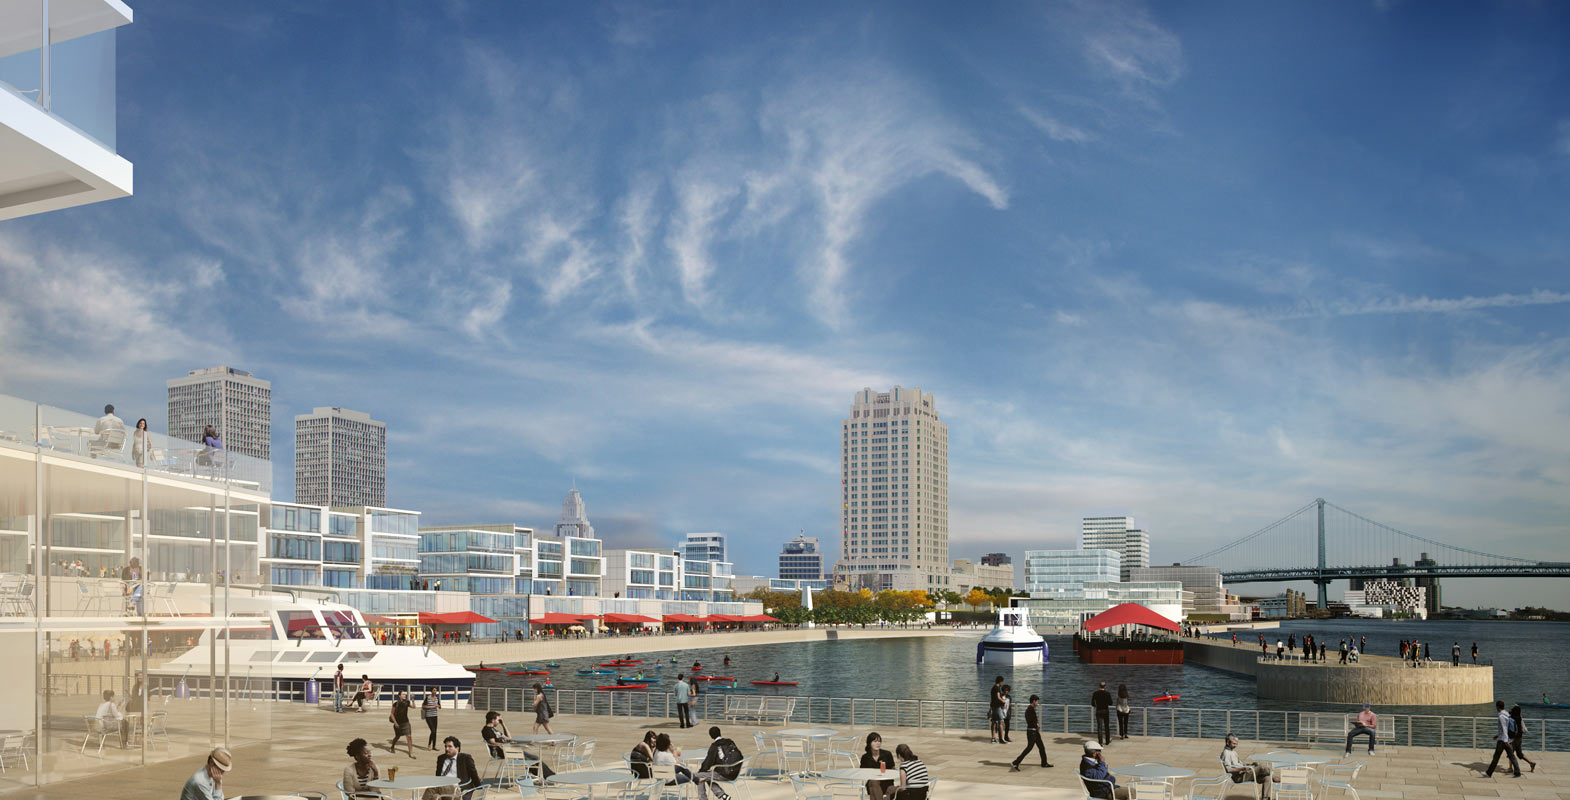 <p>At the Penn's Landing basin, mid-rise residential development is proposed, with waterfront restaurants and retail on the bottom two floors, and floating restaurants attached to the quay.</p>